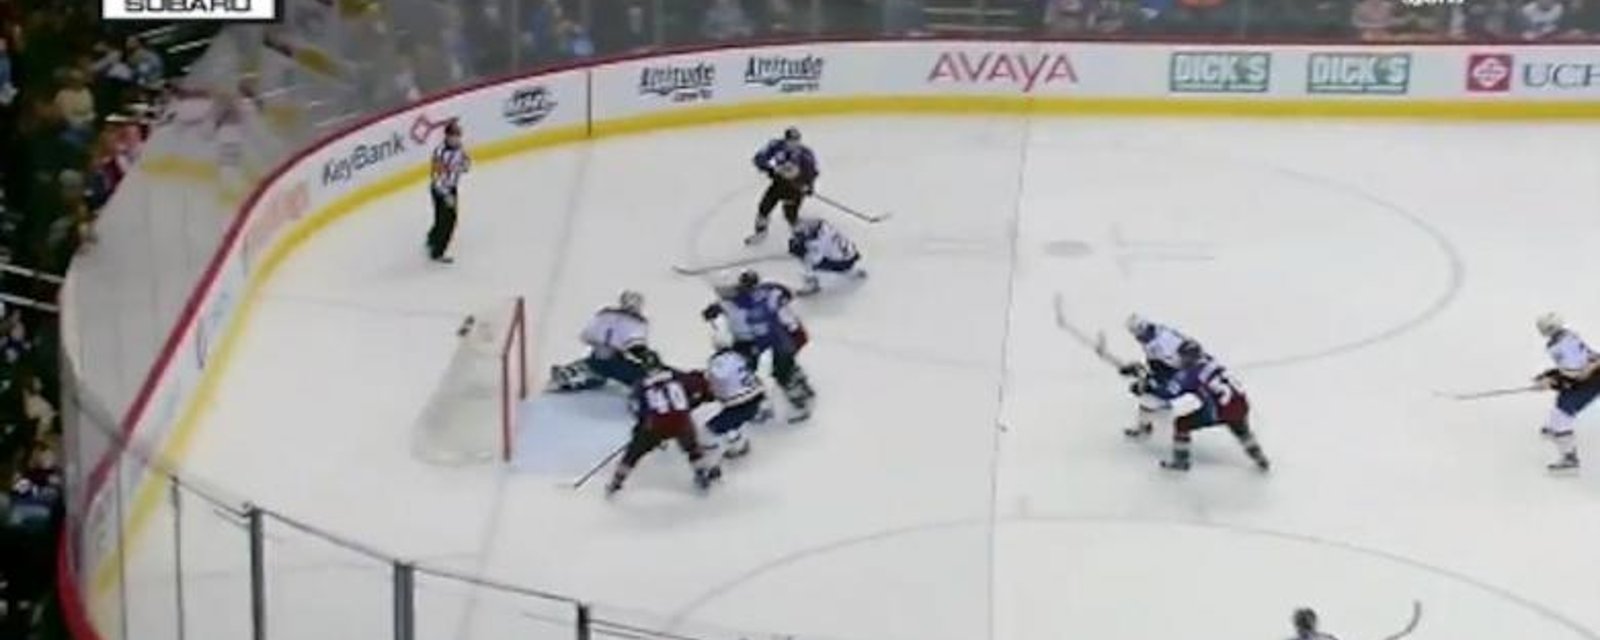 Video: Avalanche dazzling last minute goal after pretty passing play.